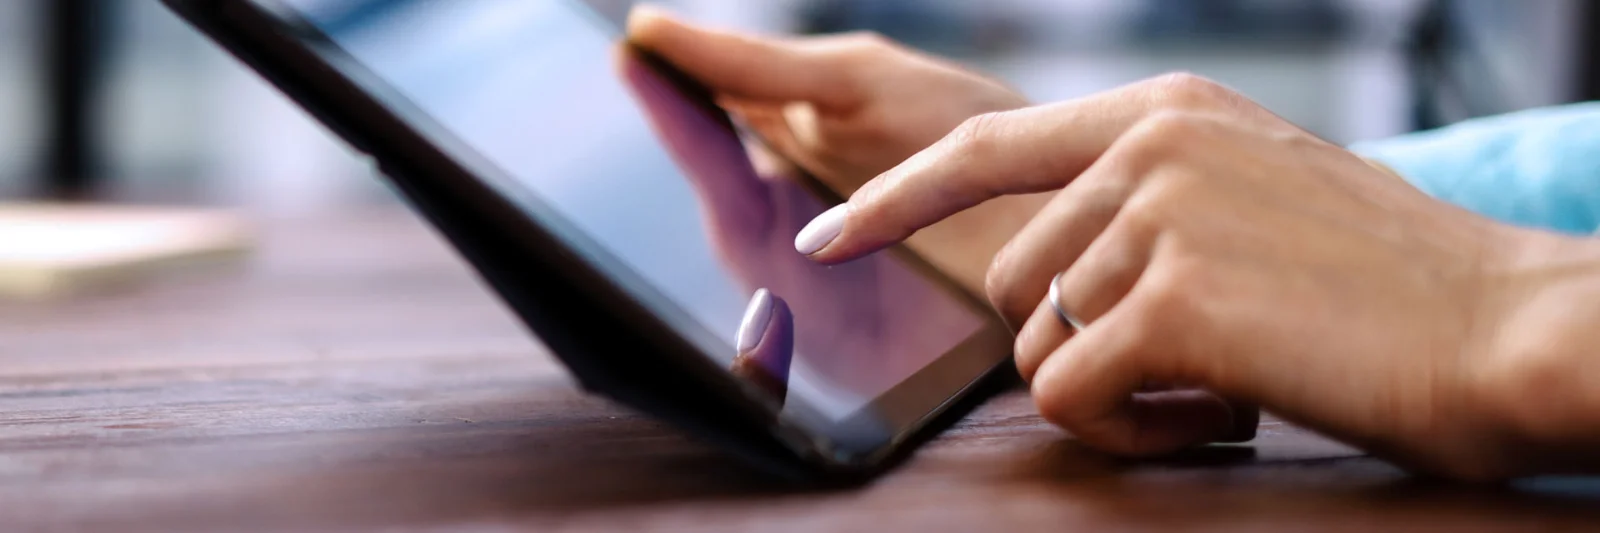 The image shows a close-up of hands using a tablet, with one hand tapping on the screen. The tablet is lying on a surface and the background is slightly blurred, suggesting an interior space. The focus is on the interaction with the tablet.